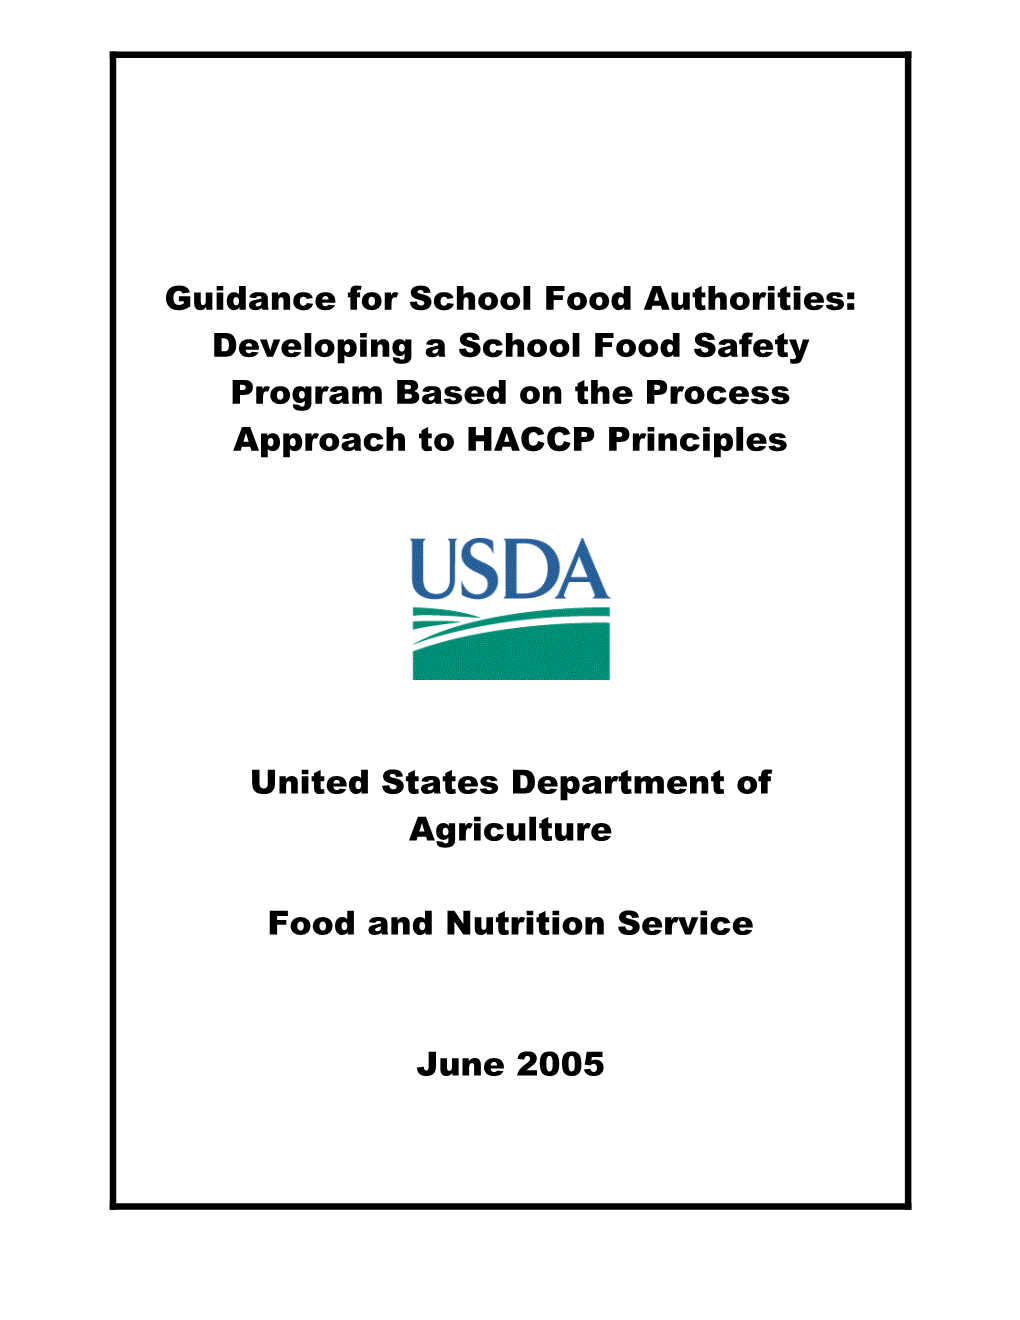 Guidelines on Developing a School Food Safety Program Based on the Process Approach To